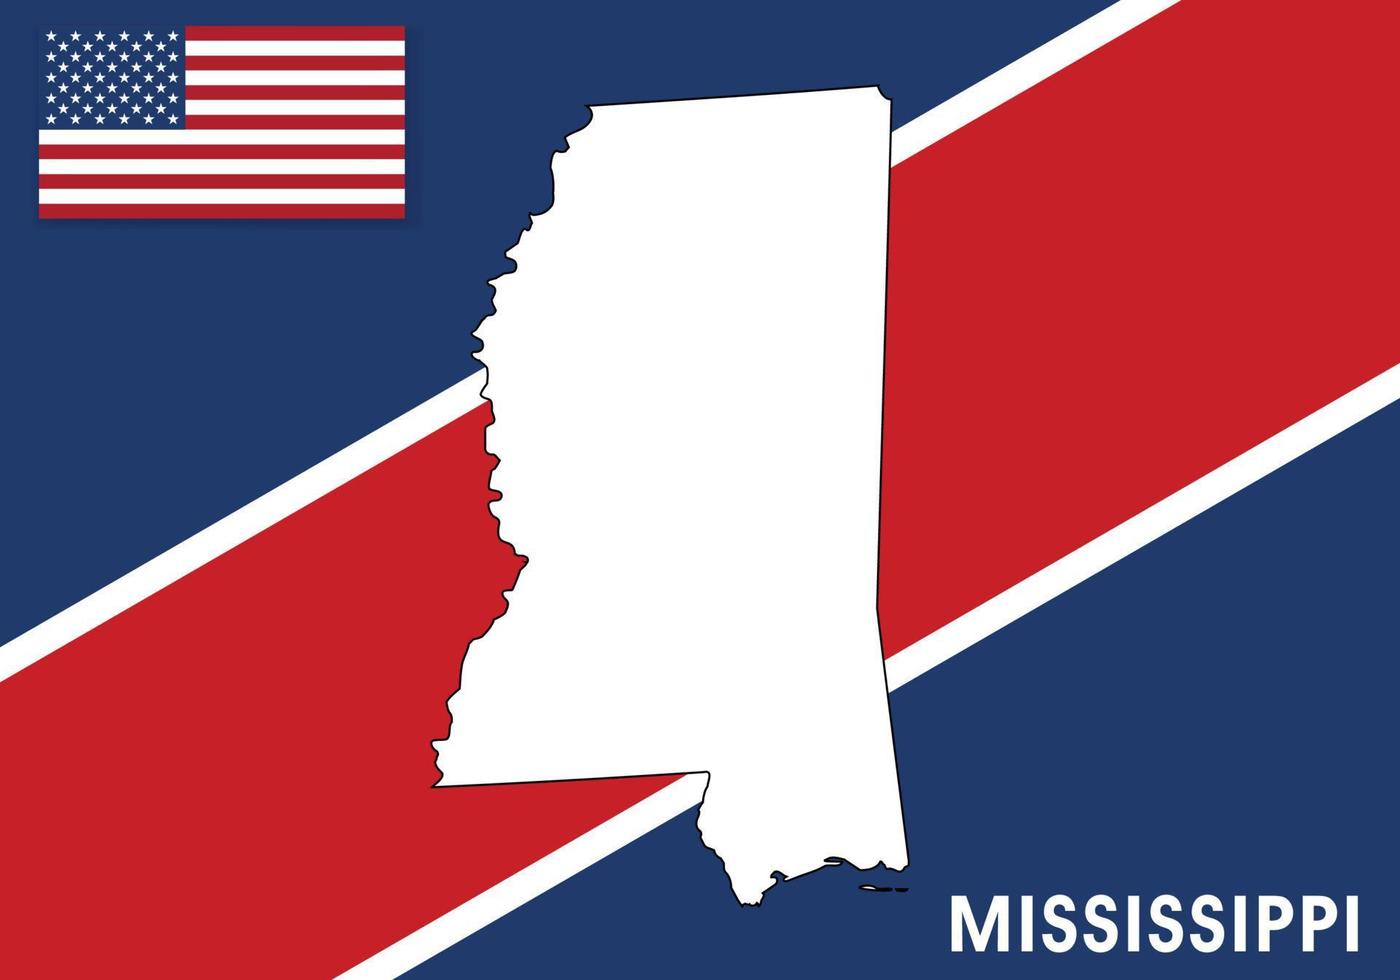 Mississippi - USA, United States of America Map vector template.  white color map on flag background for design, infographic - Vector illustration eps 10